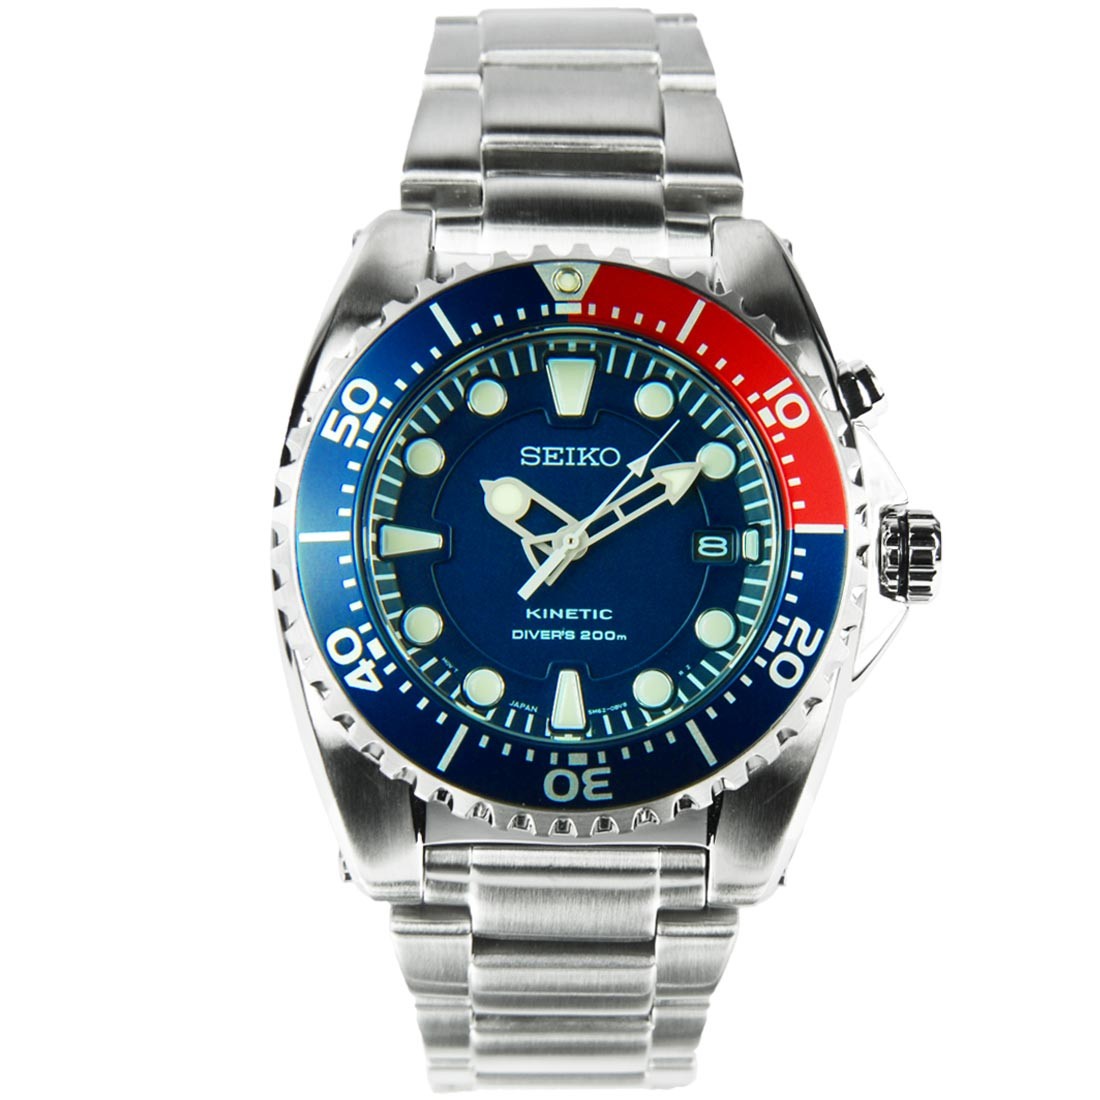 10 Best Seiko Kinetic Watches For Men - The Watch Blog